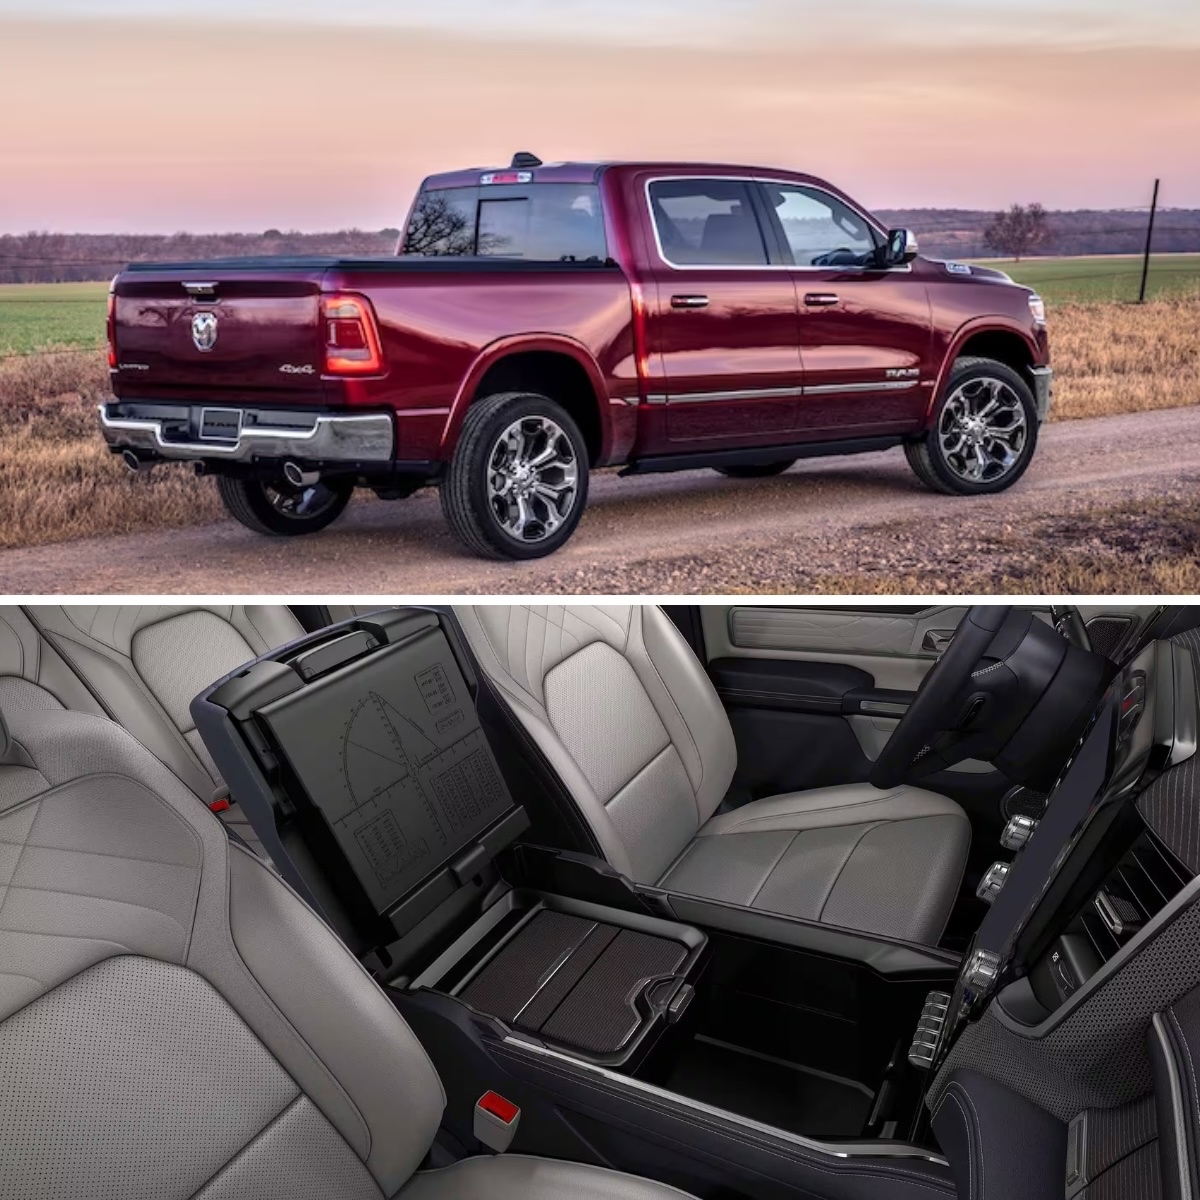 This season, let strength meet style. The 2024 #Ram1500 is here to revolutionize the way you adventure! Hurry and visit us today to immerse in its beauty and power. #CarCrushWednesday #Ram #RamUSA